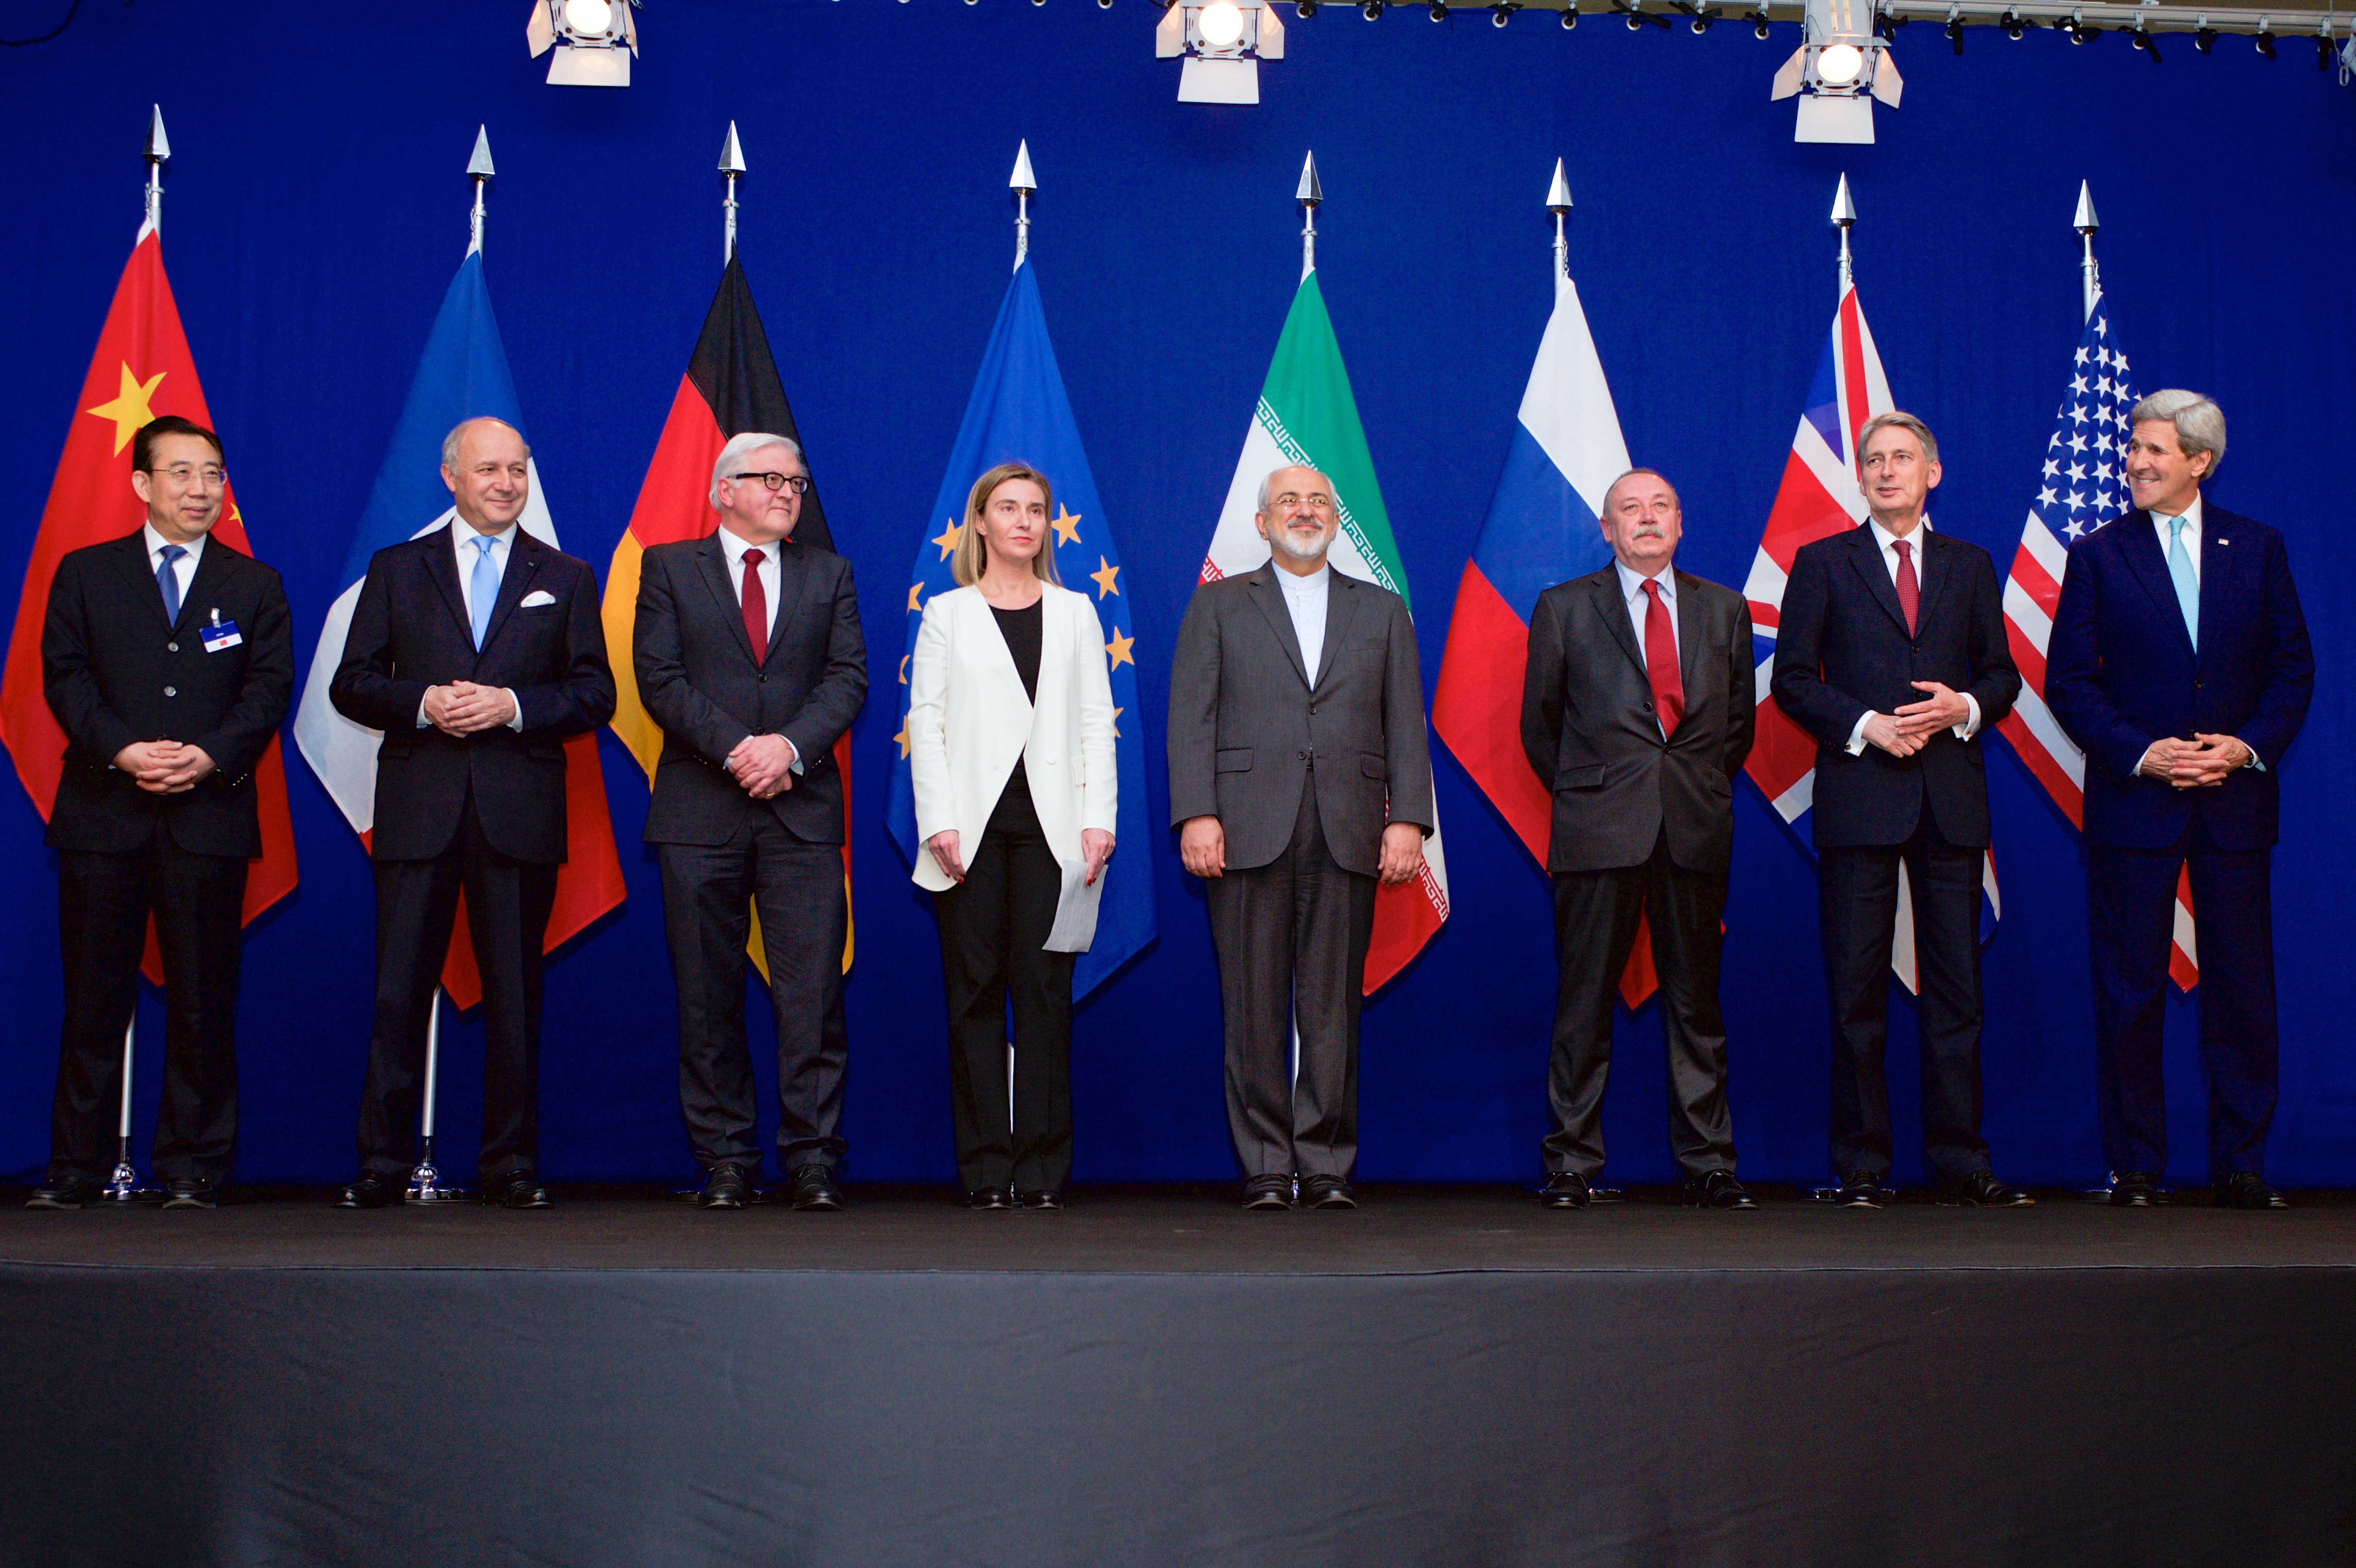 Will the U.S. Blow Up the Iran Nuclear Deal?